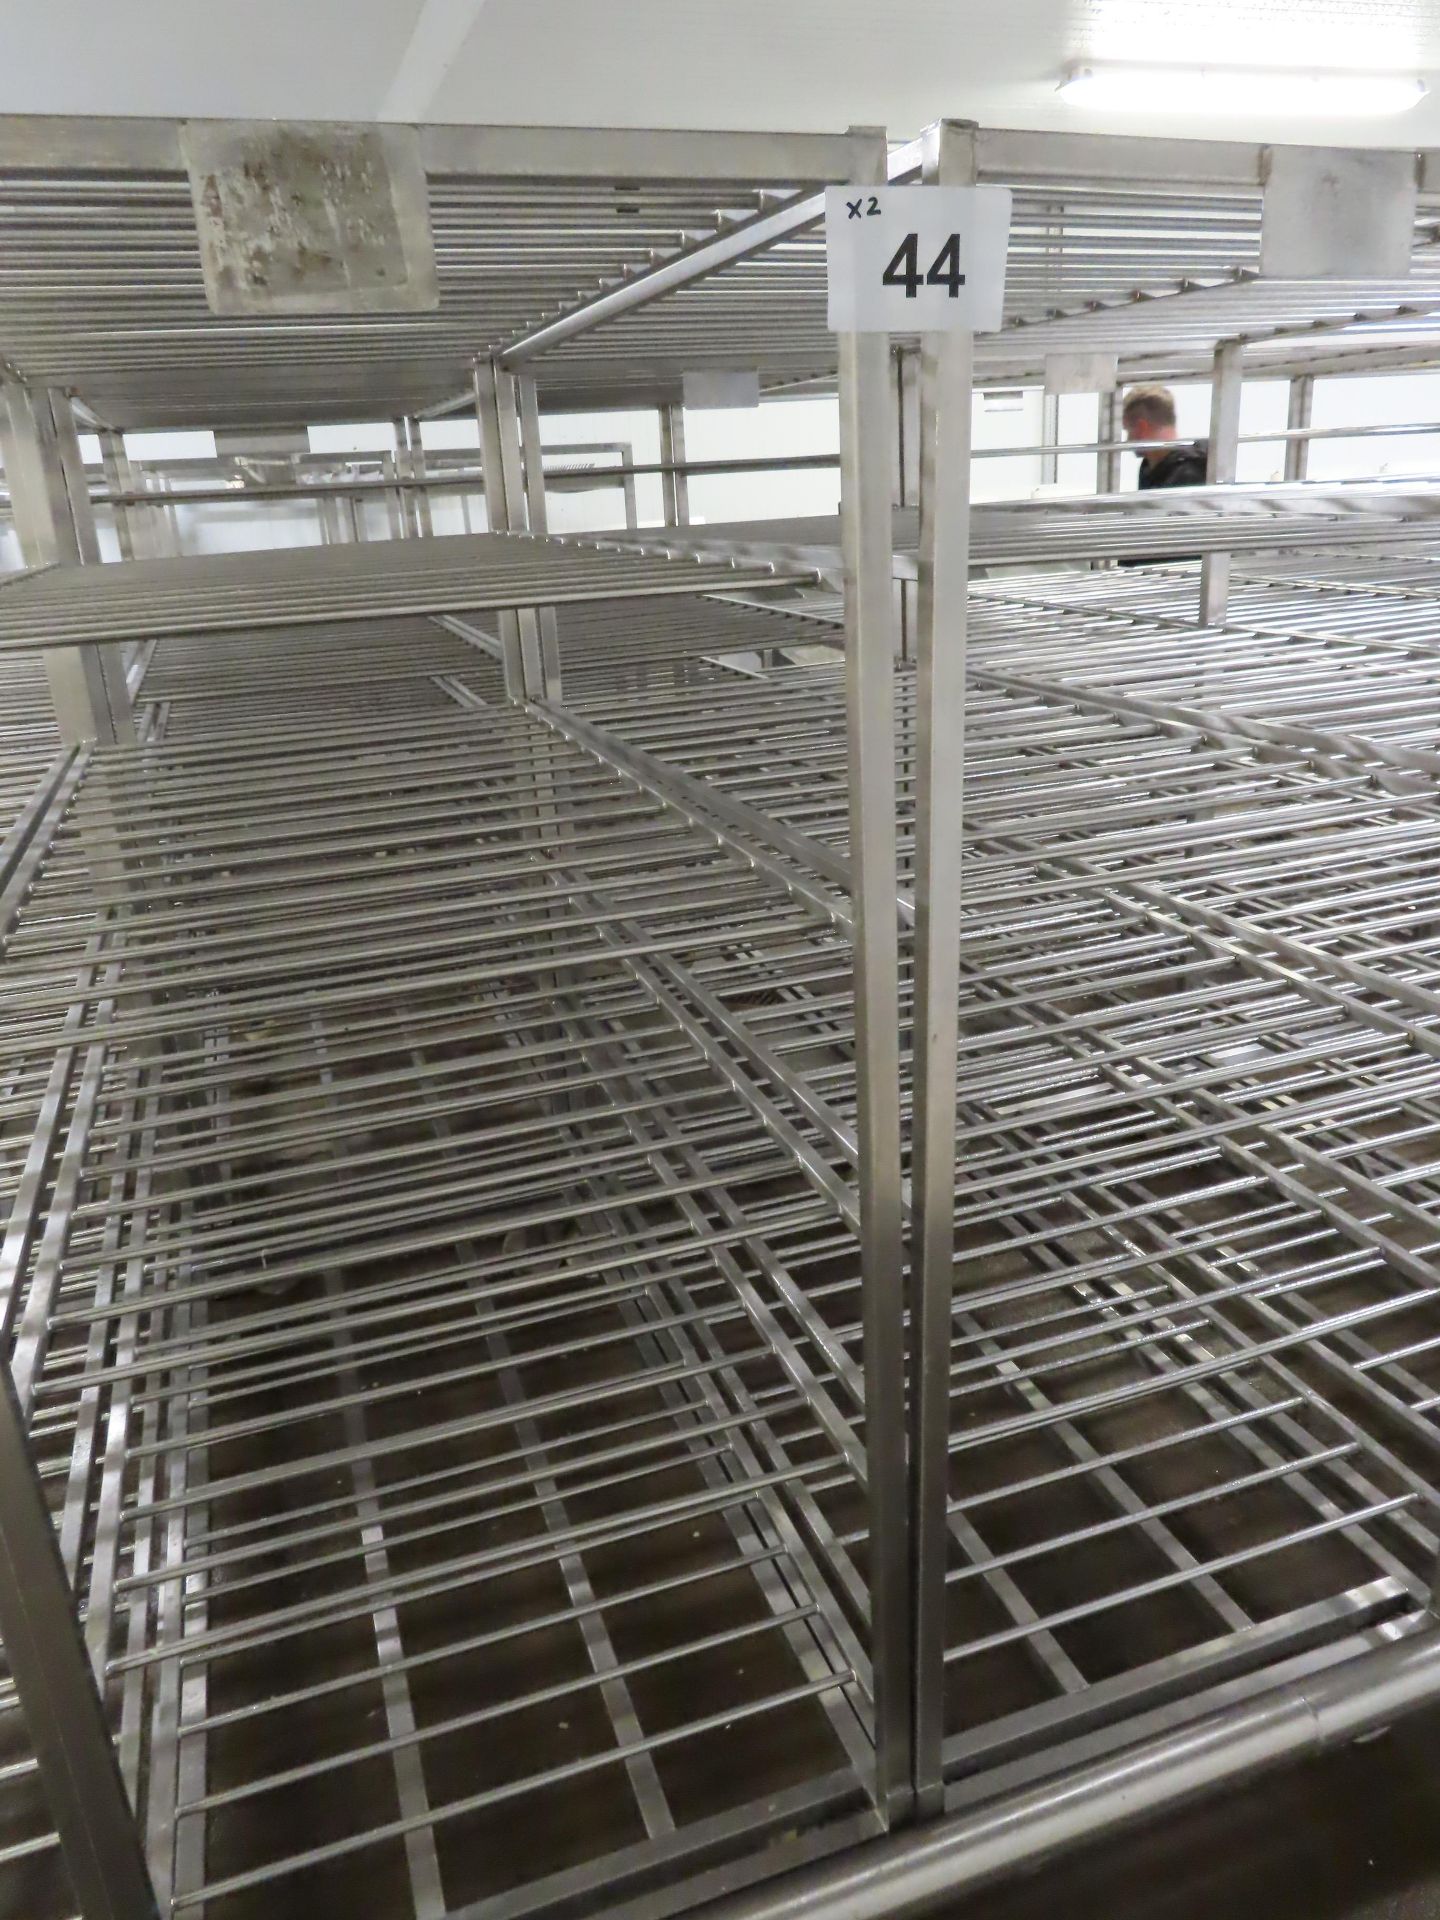 2 X S/S RACKS WITH 5-SHELVES. - Image 2 of 2